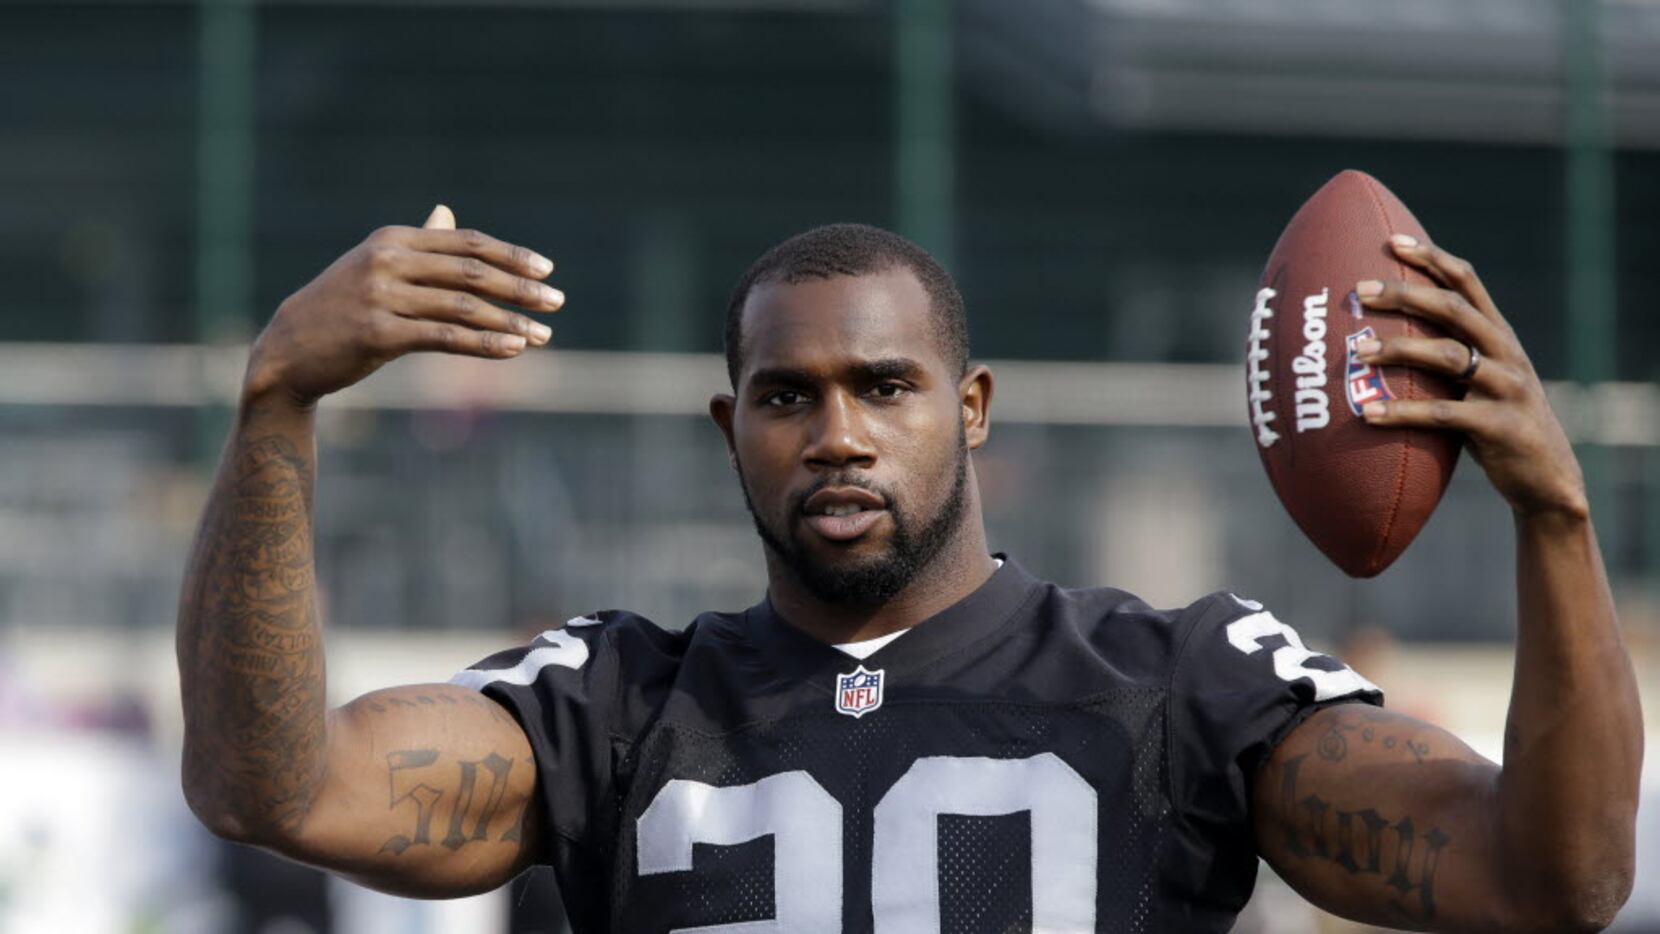 Cowboys agree to deal with RB Darren McFadden in wake of